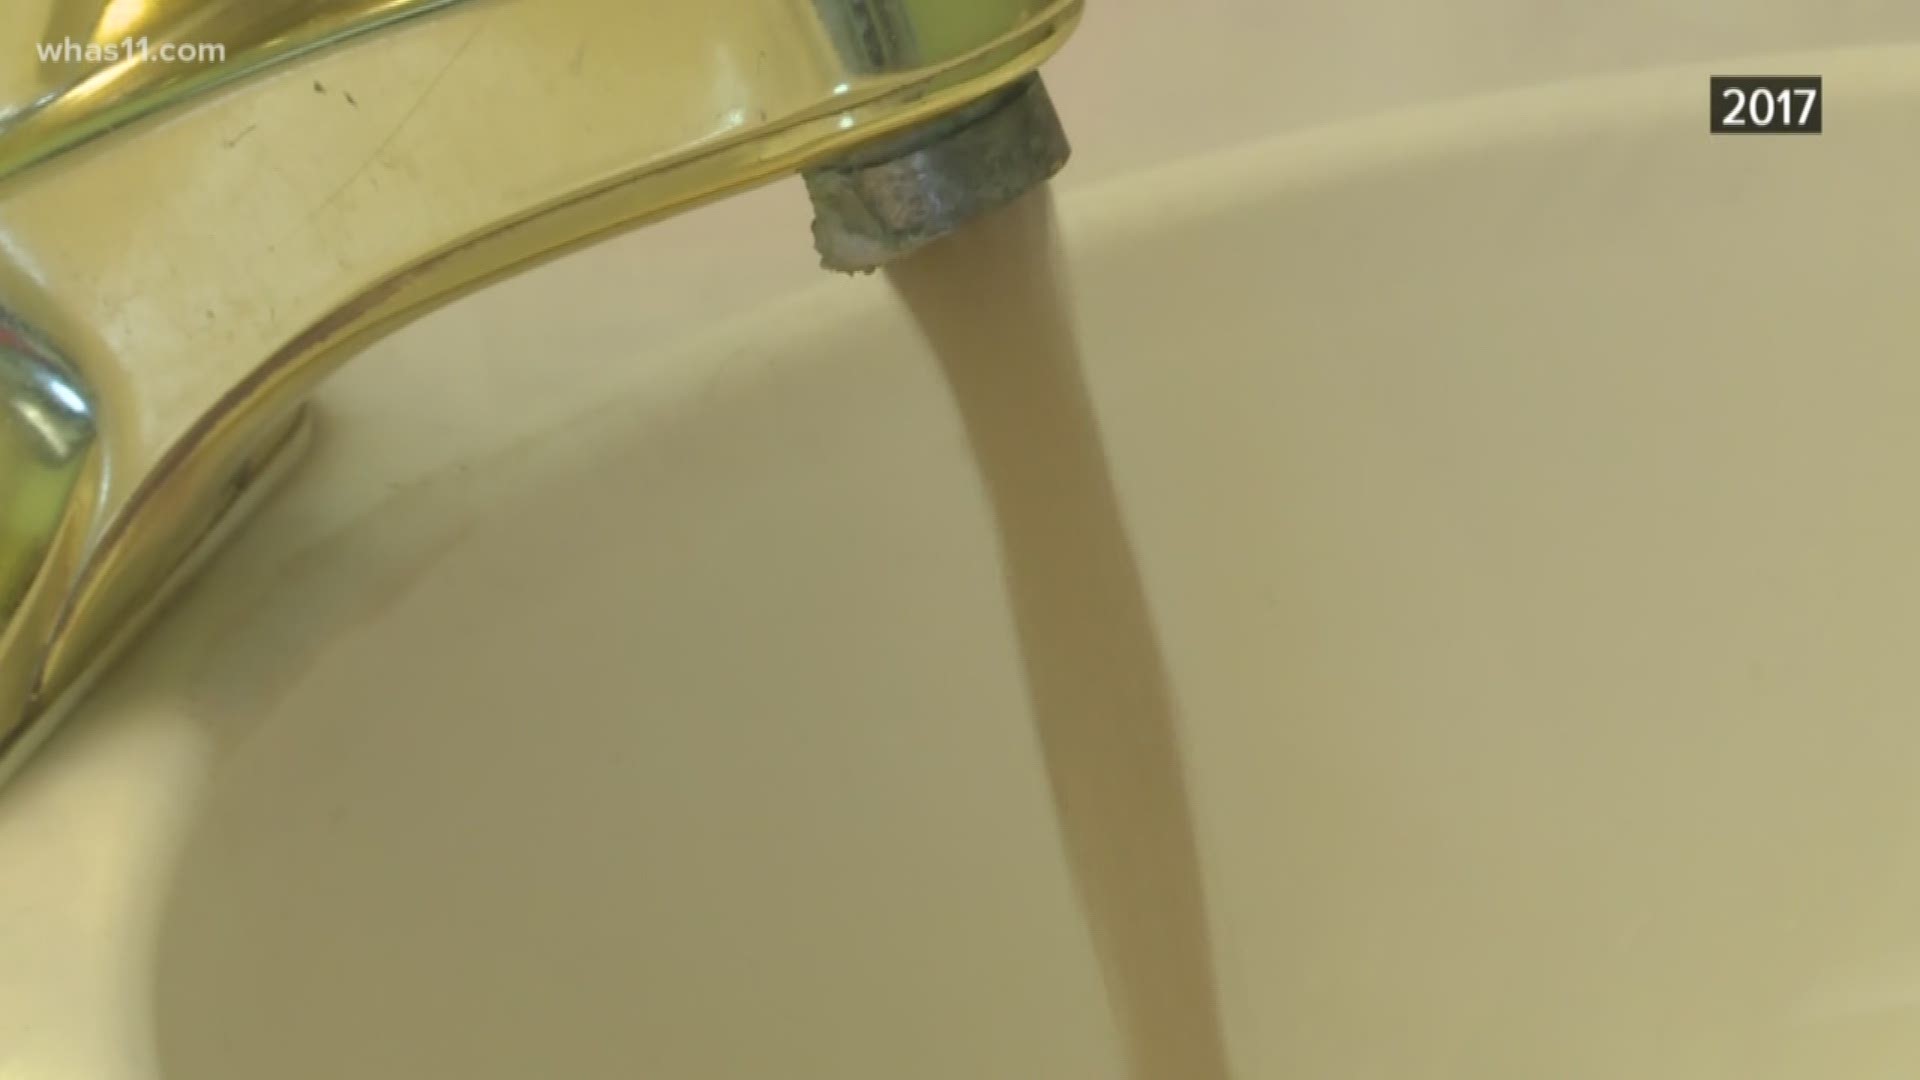 Indiana American Water took over Charlestown's water system in March and has promised to invest more than $7 million into making improvements.